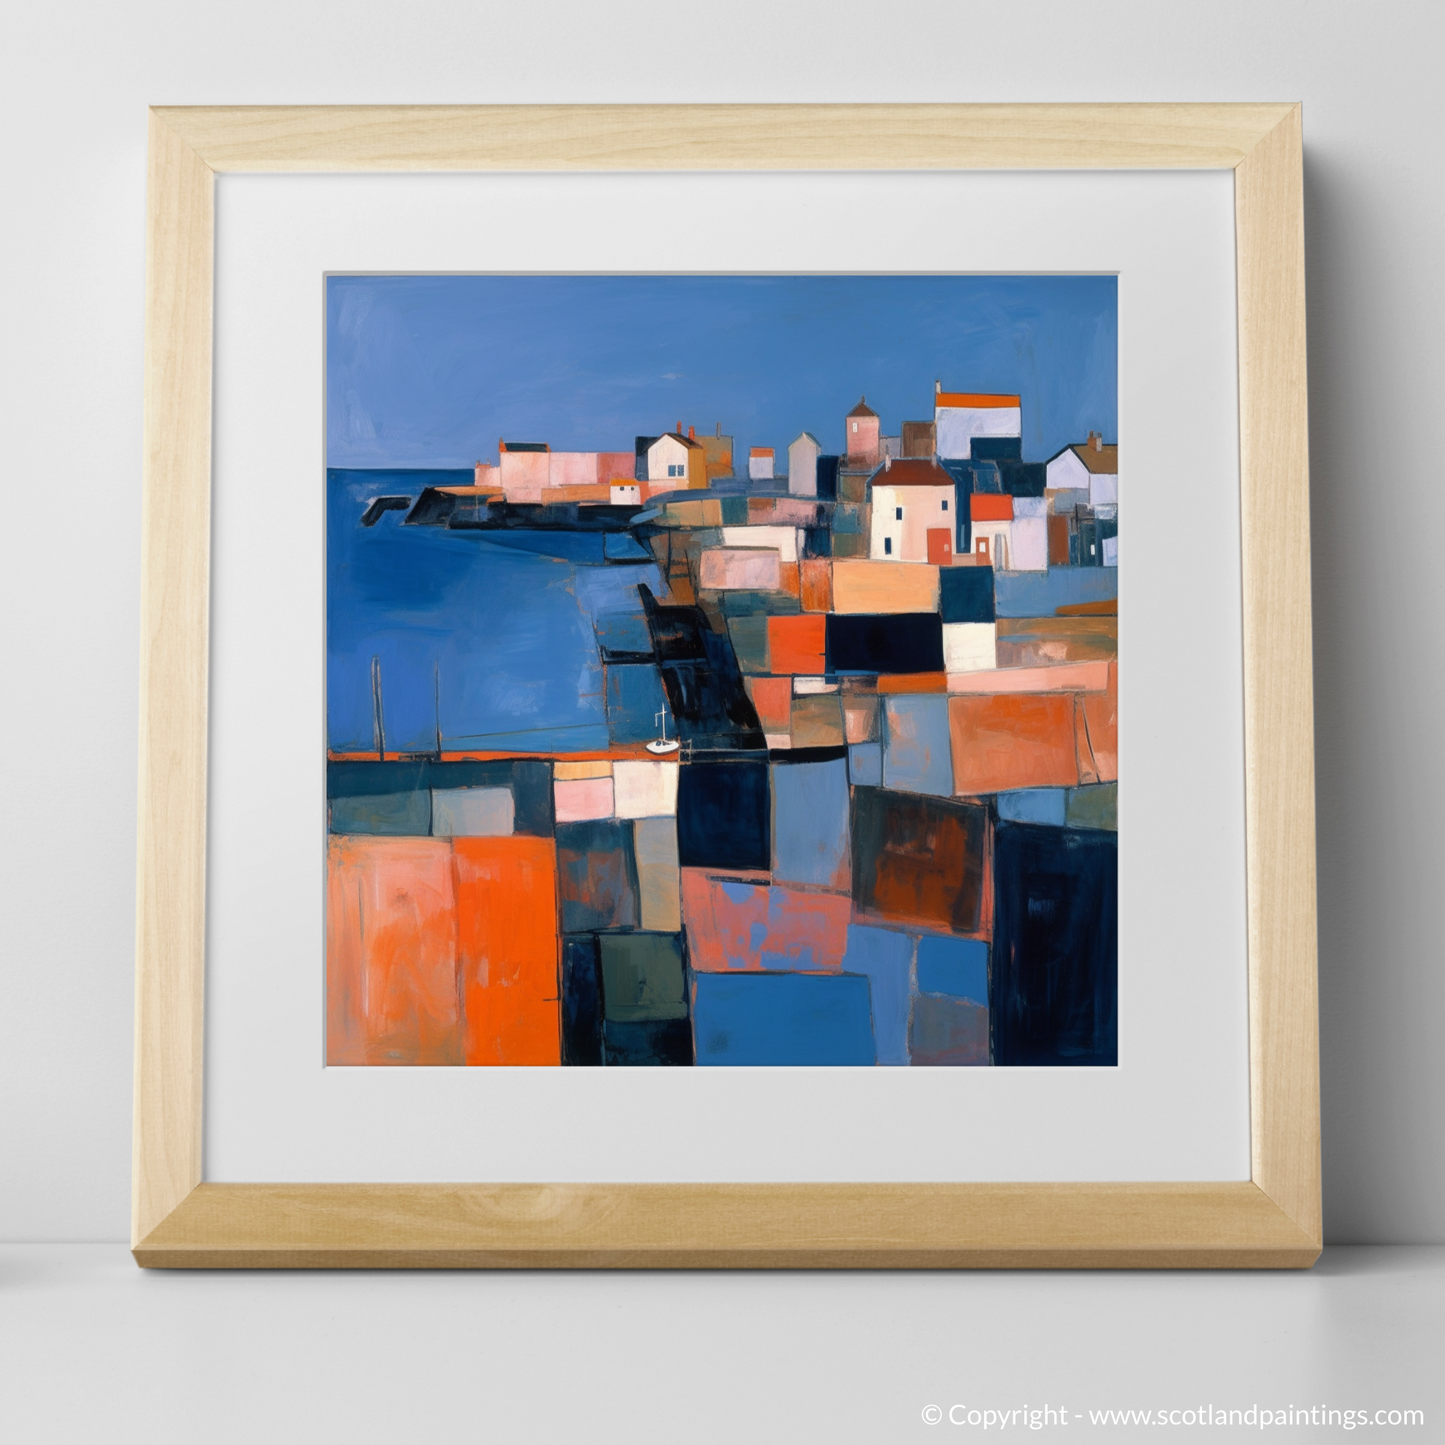 Dusk at Crail Harbour: An Abstract Impressionist Interpretation